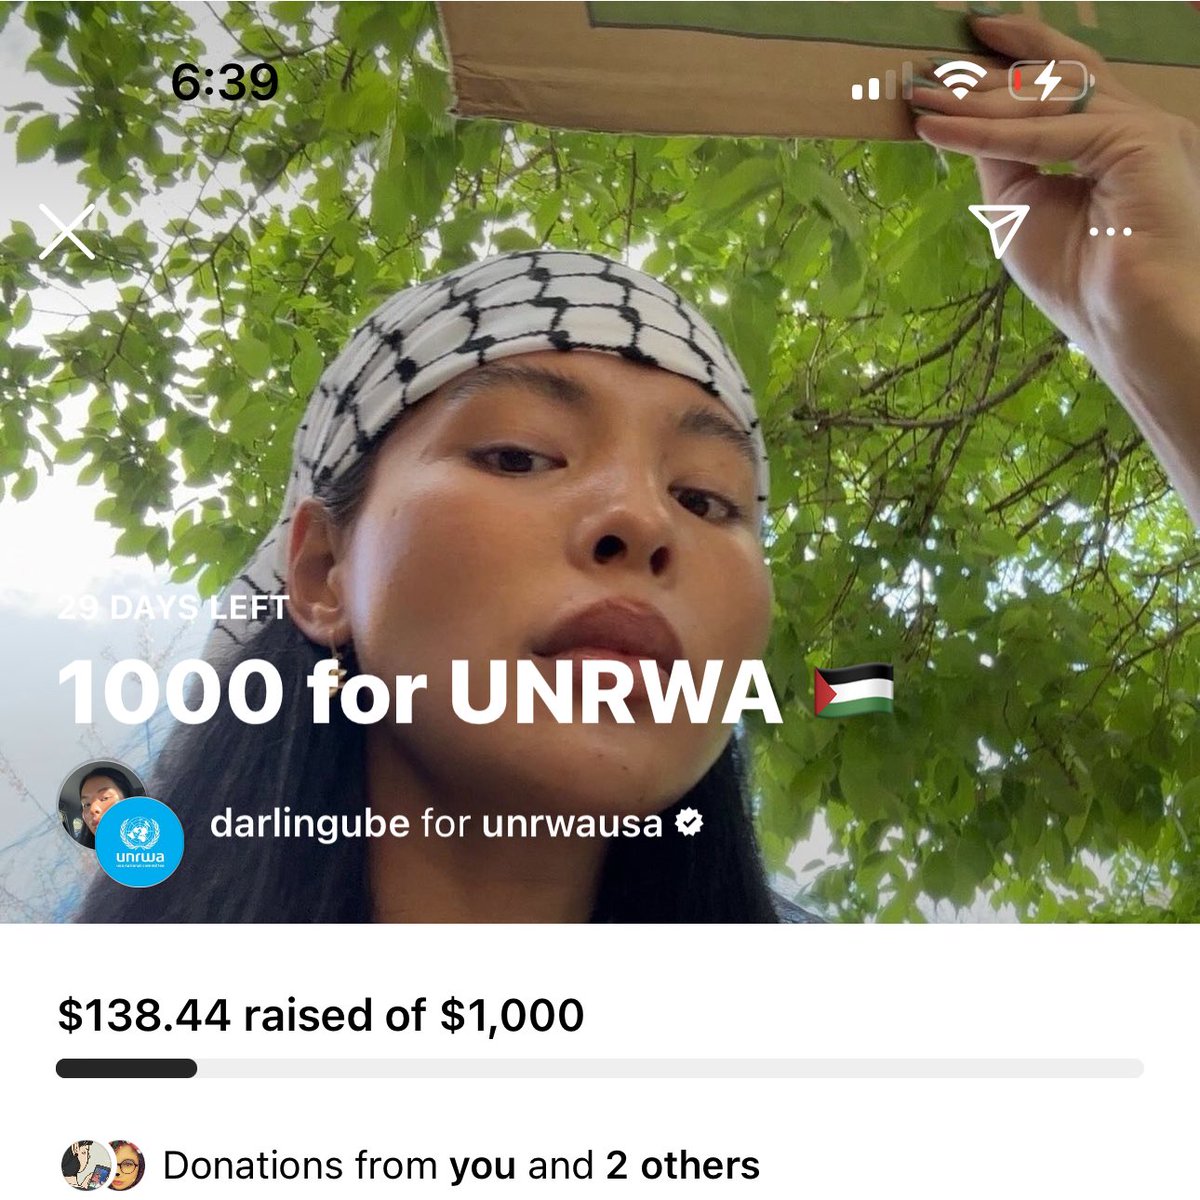 i started a small fundraiser for UNRWA on my ig if anyone wants to contribute!